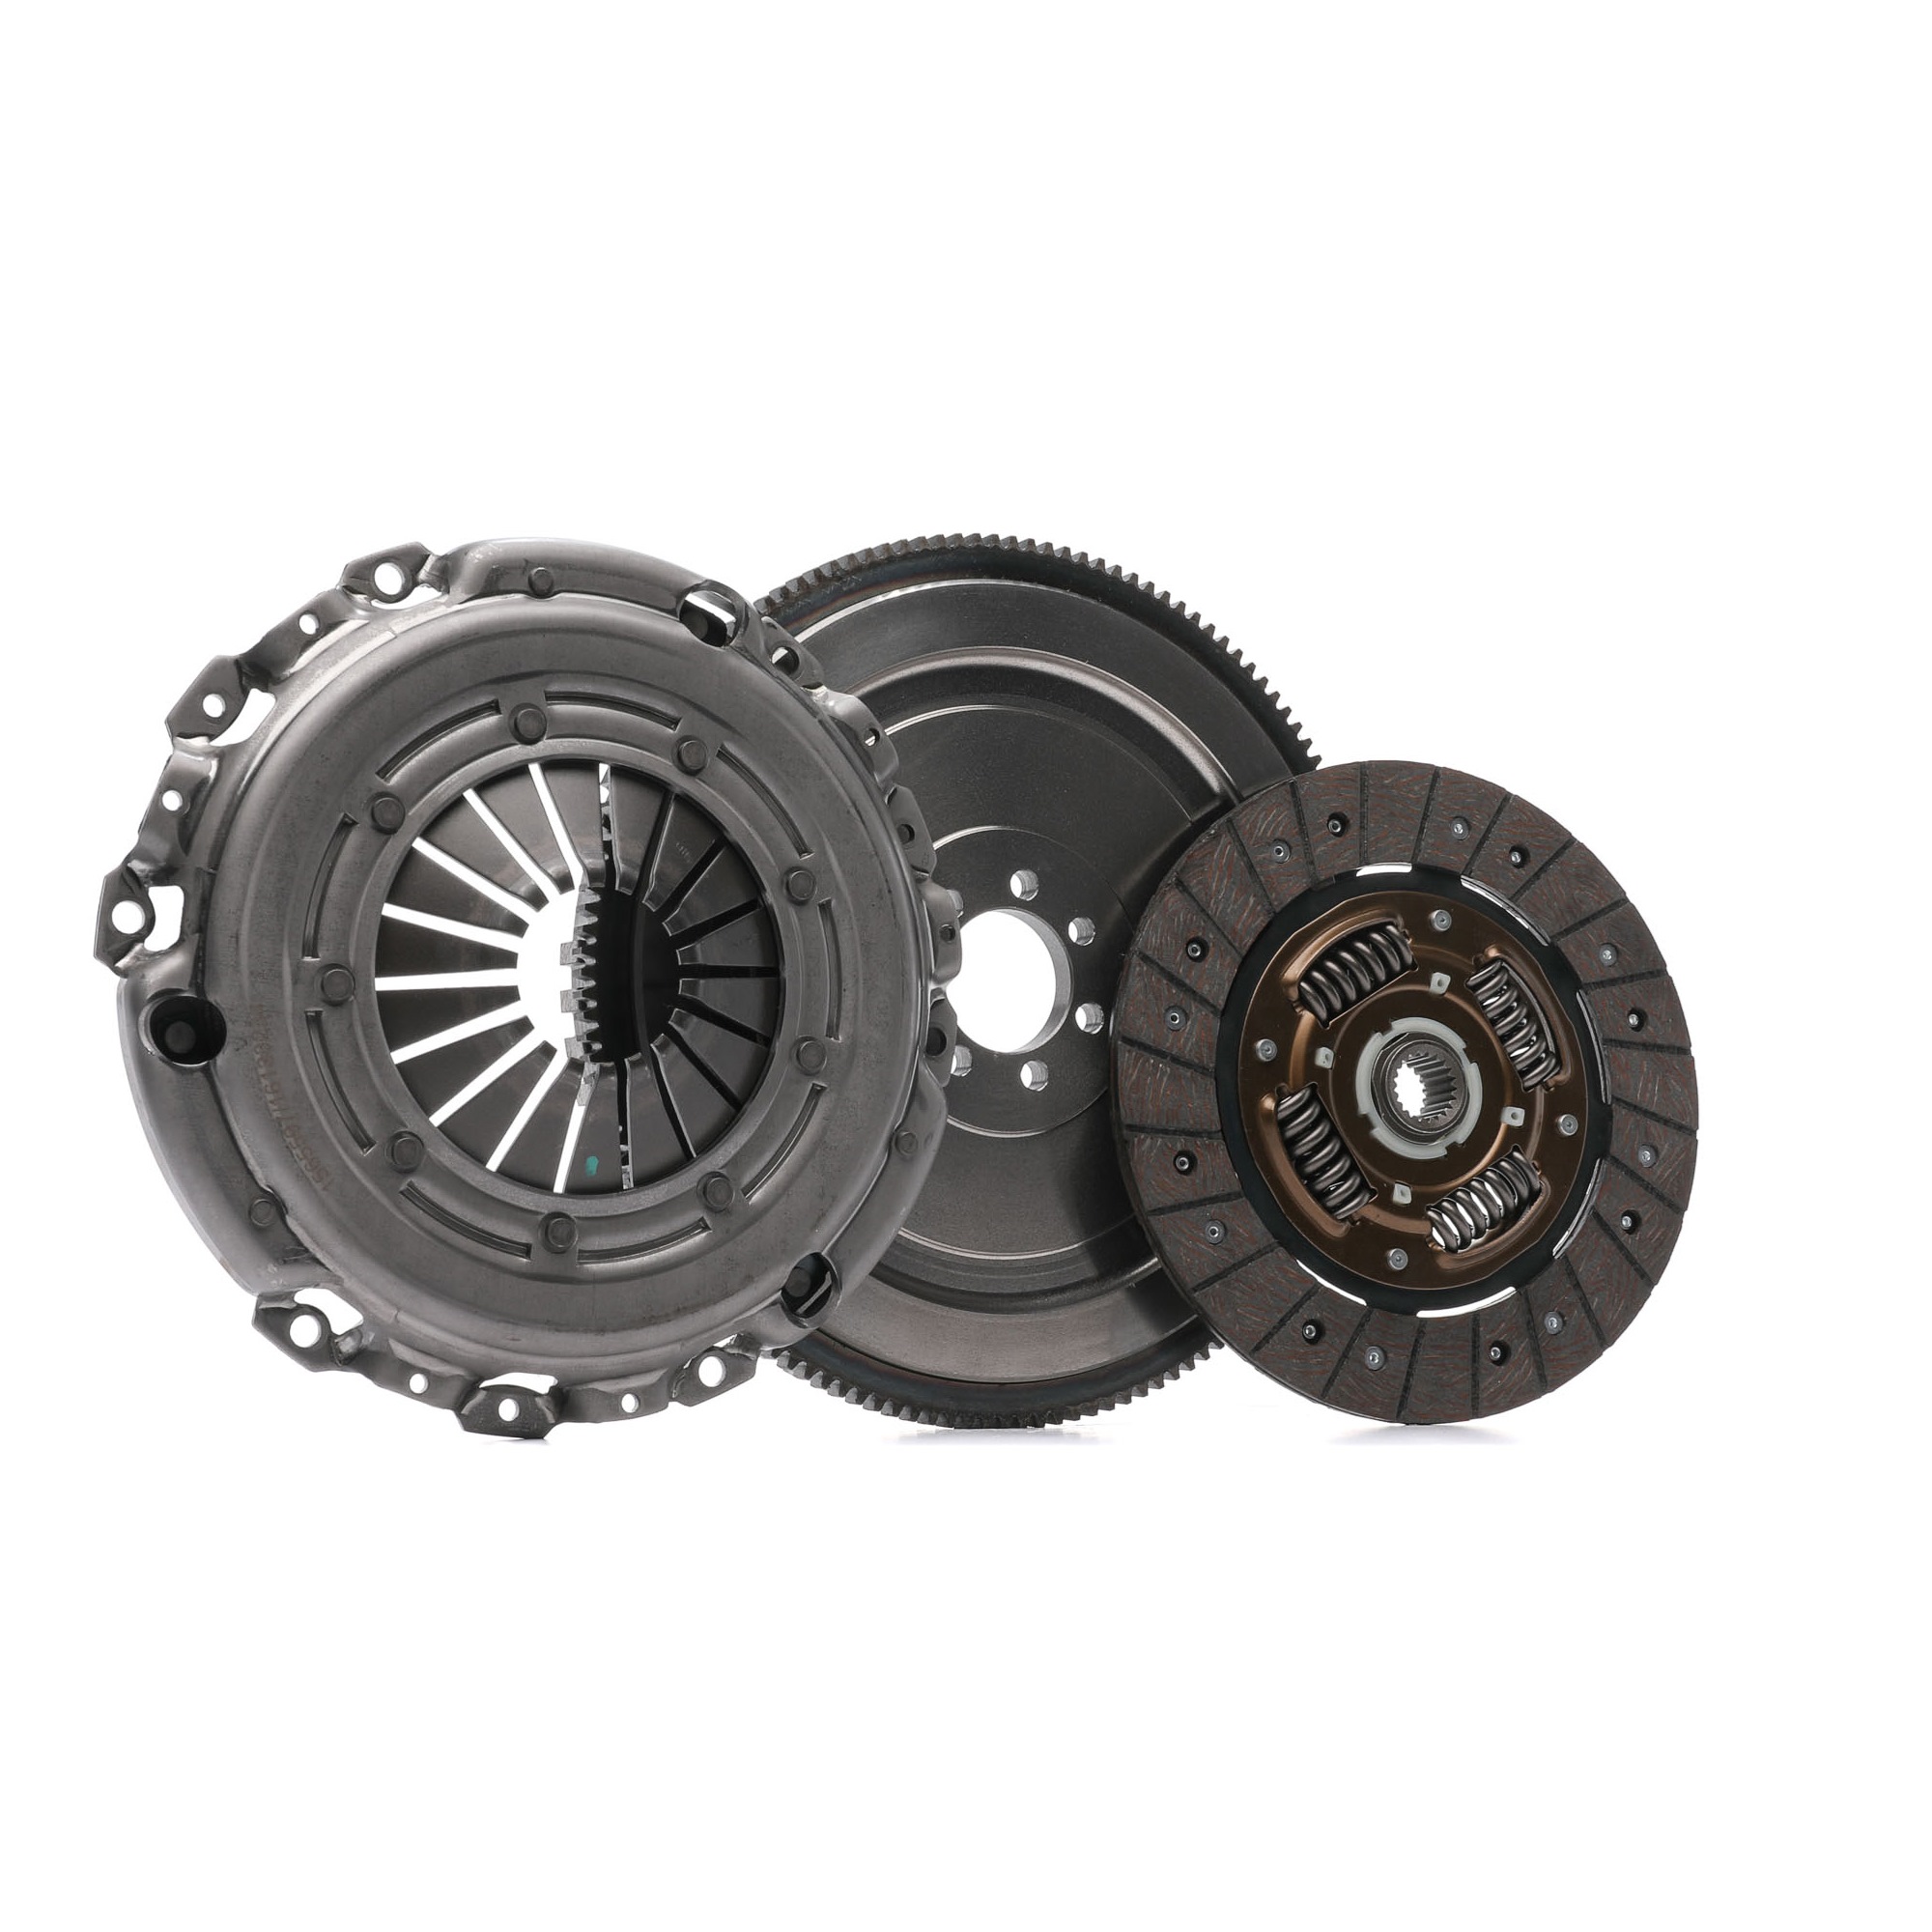 RIDEX 479C3035 Clutch kit with clutch pressure plate, without central slave cylinder, with flywheel, with screw set, with clutch disc, Special tools for mounting not necessary, 228mm